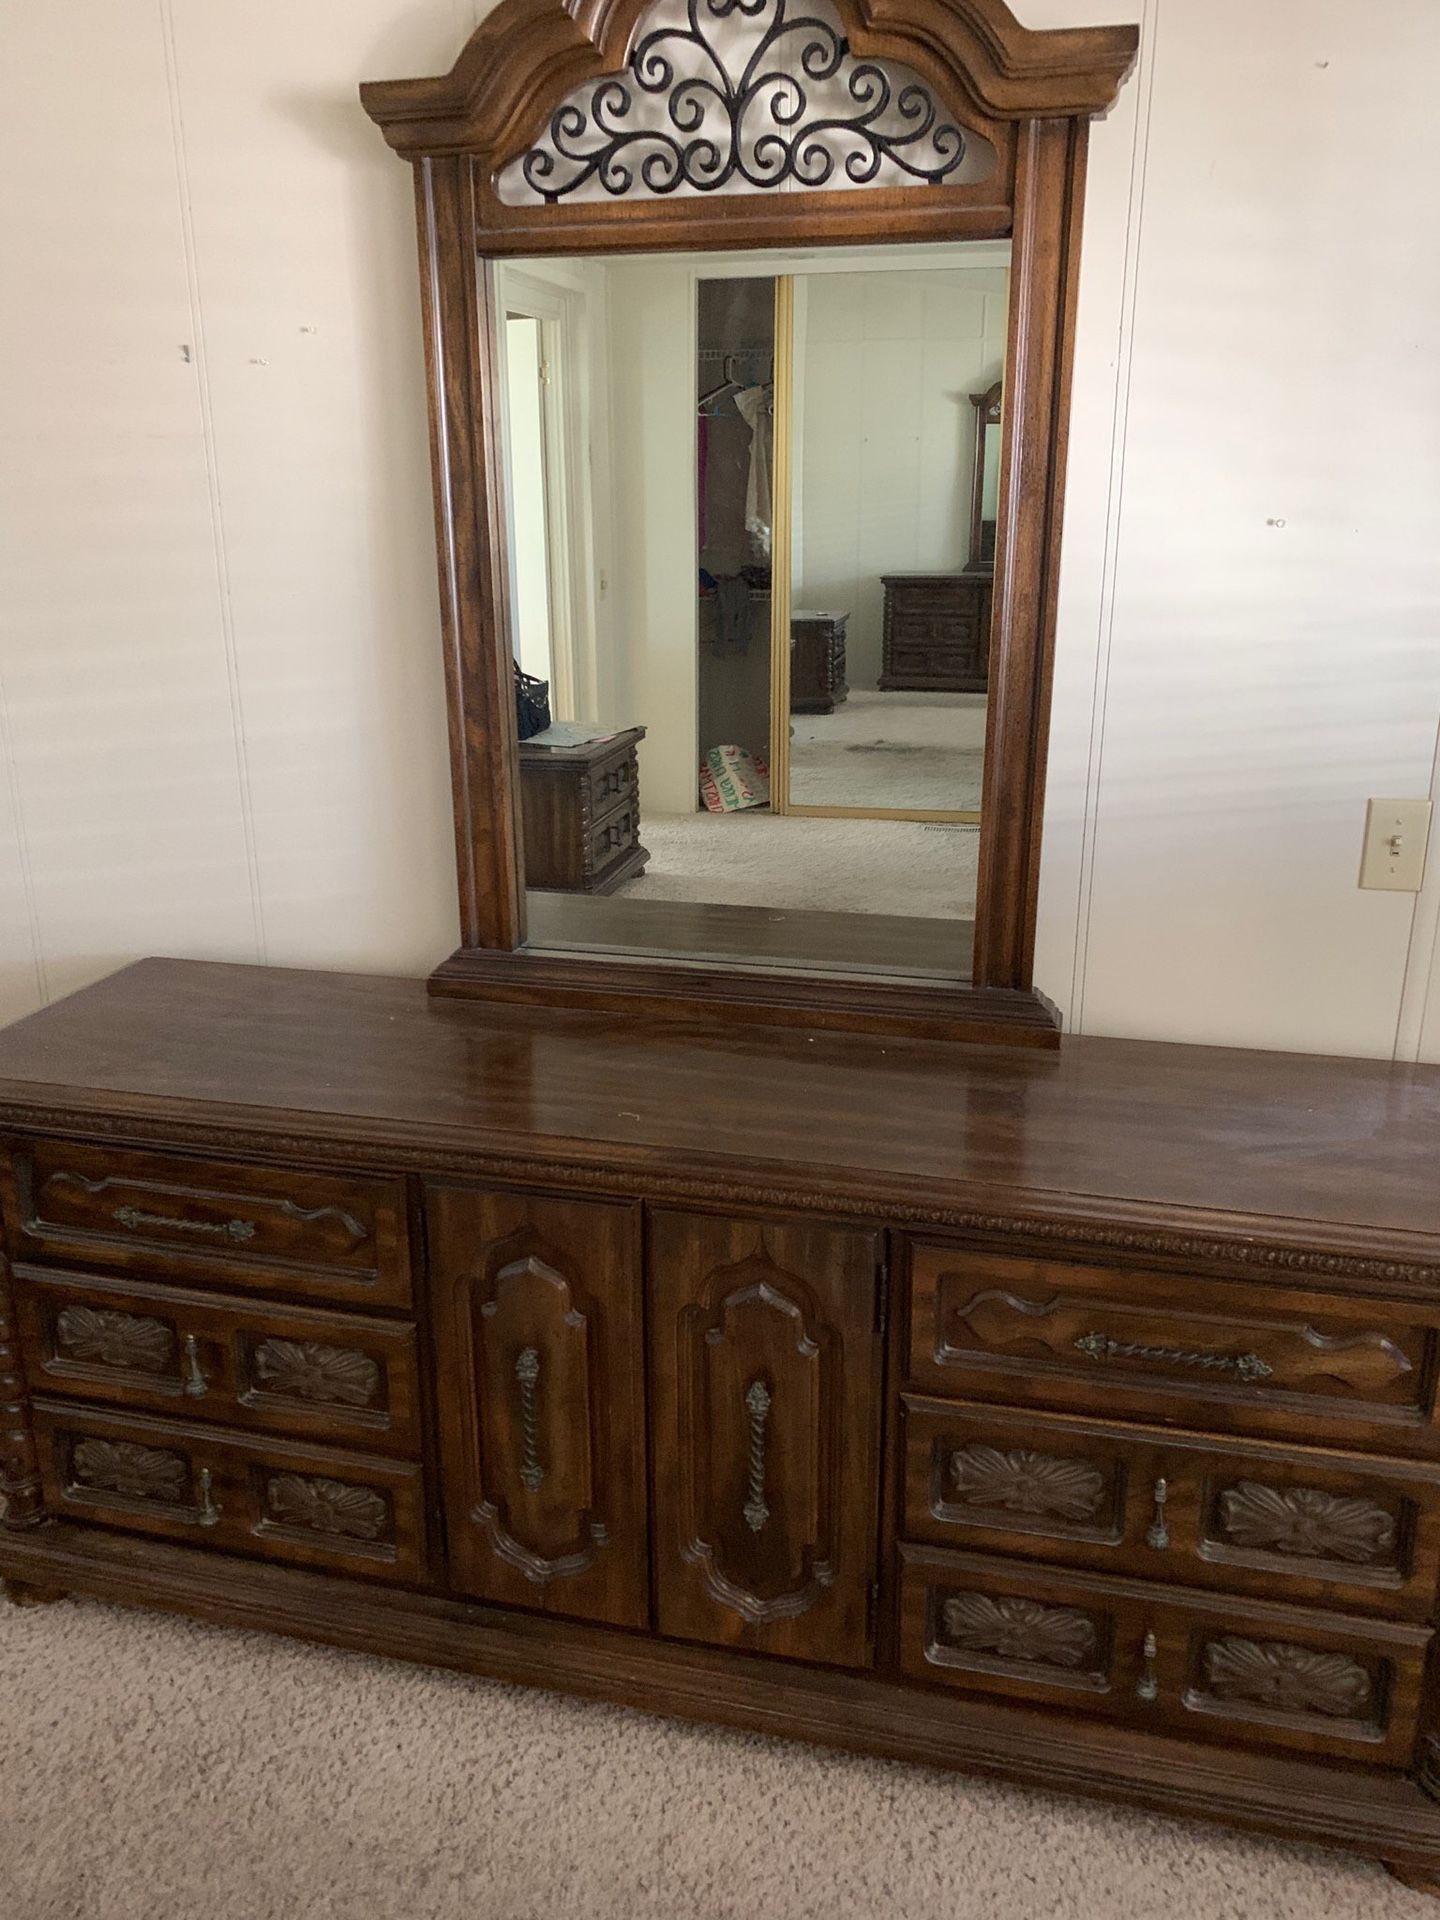 Super nice bedroom set Long dresser 2night stands and an armor this a super nice solid wood